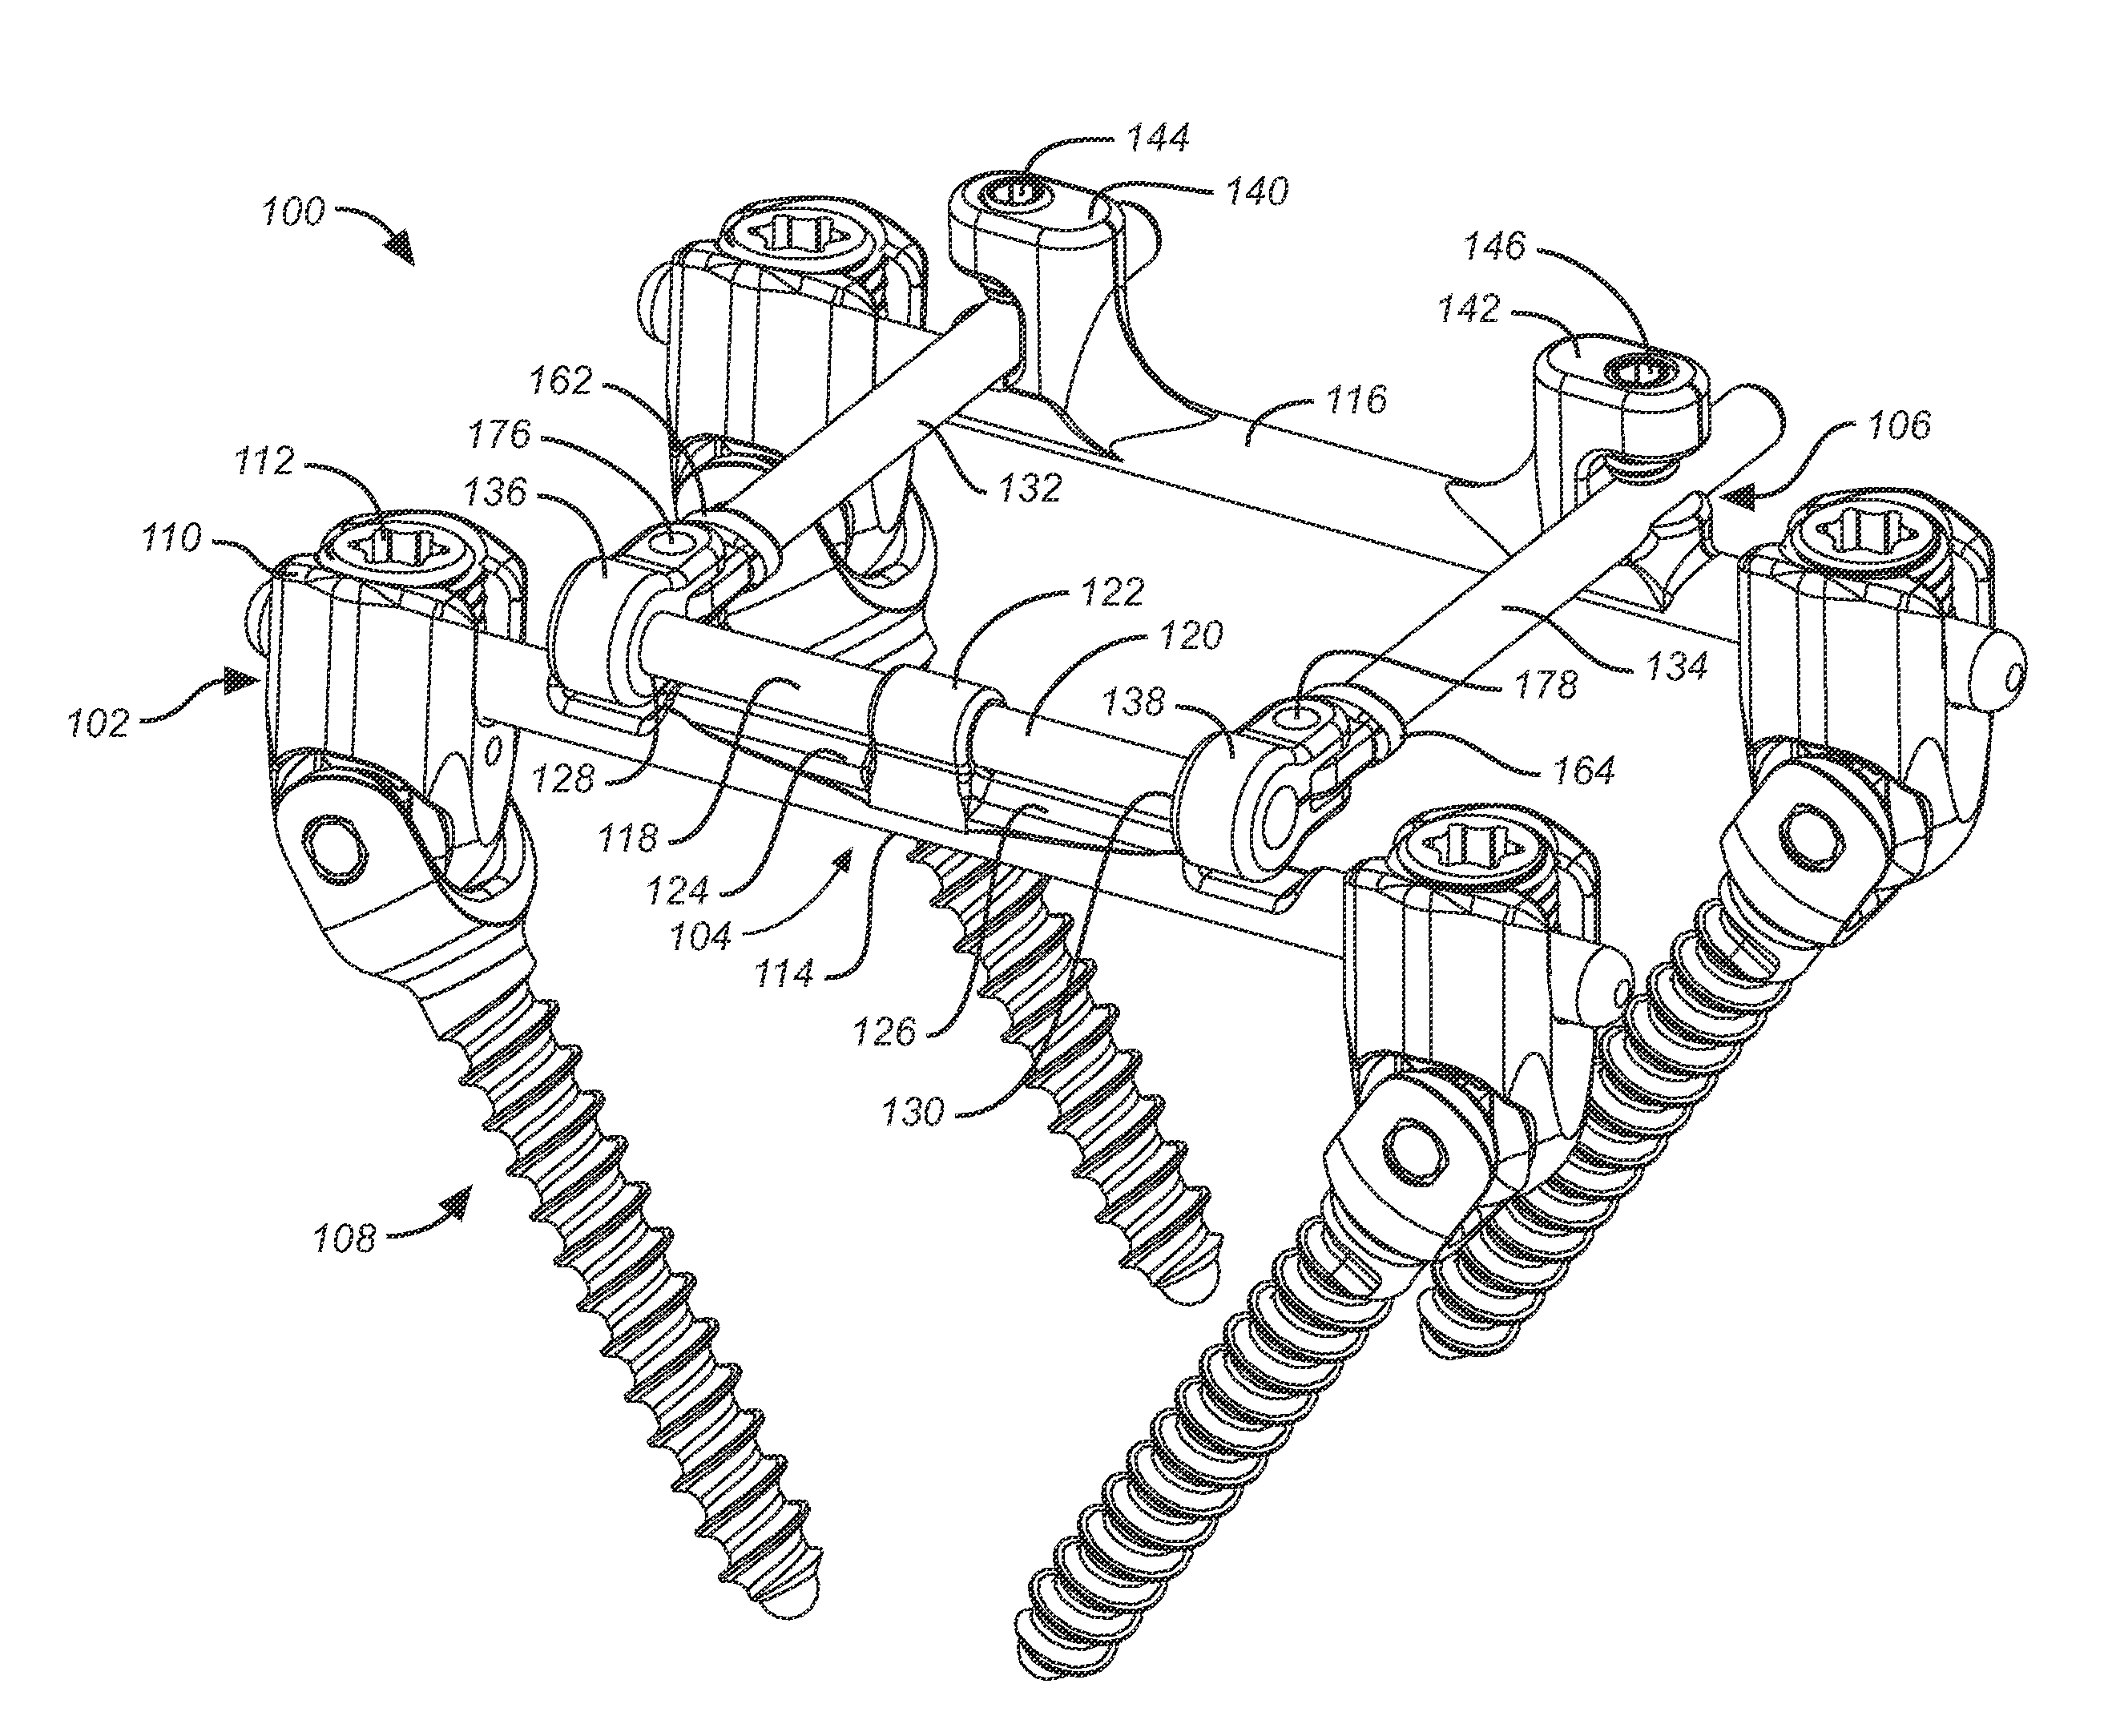 Bone anchor with a curved mounting element for a dynamic stabilization and motion preservation spinal implantation system and method